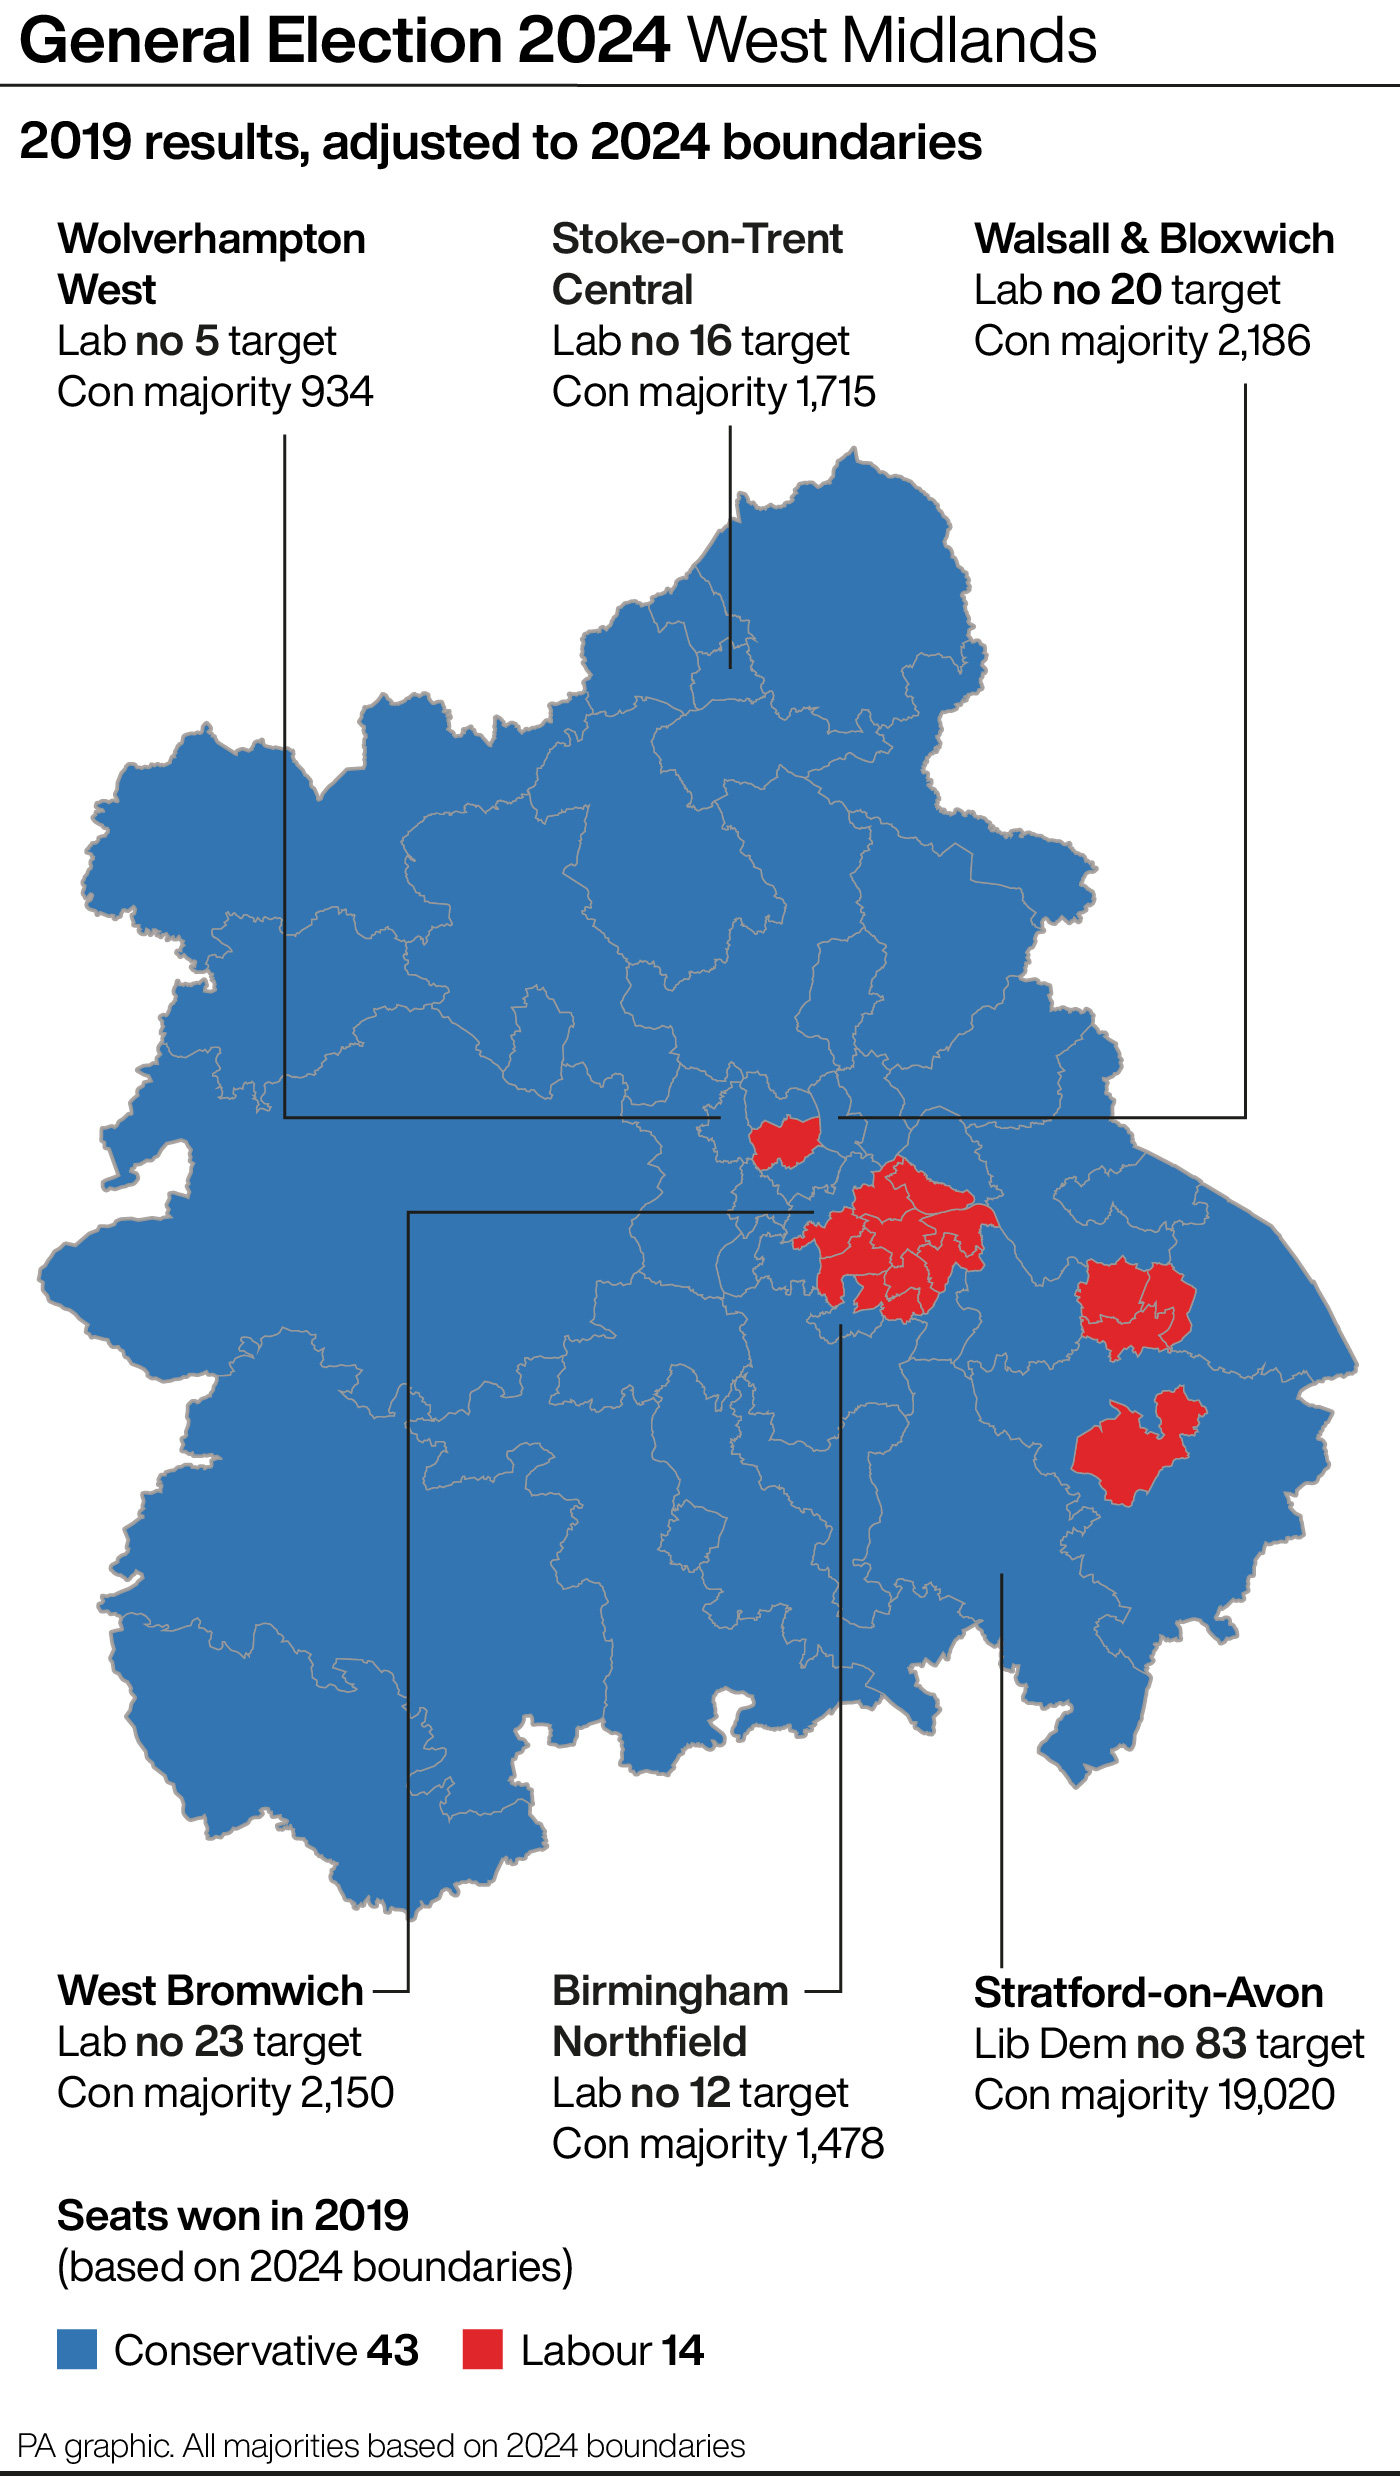 A map highlighting some of the key battleground seats in the West Midlands at the General Election